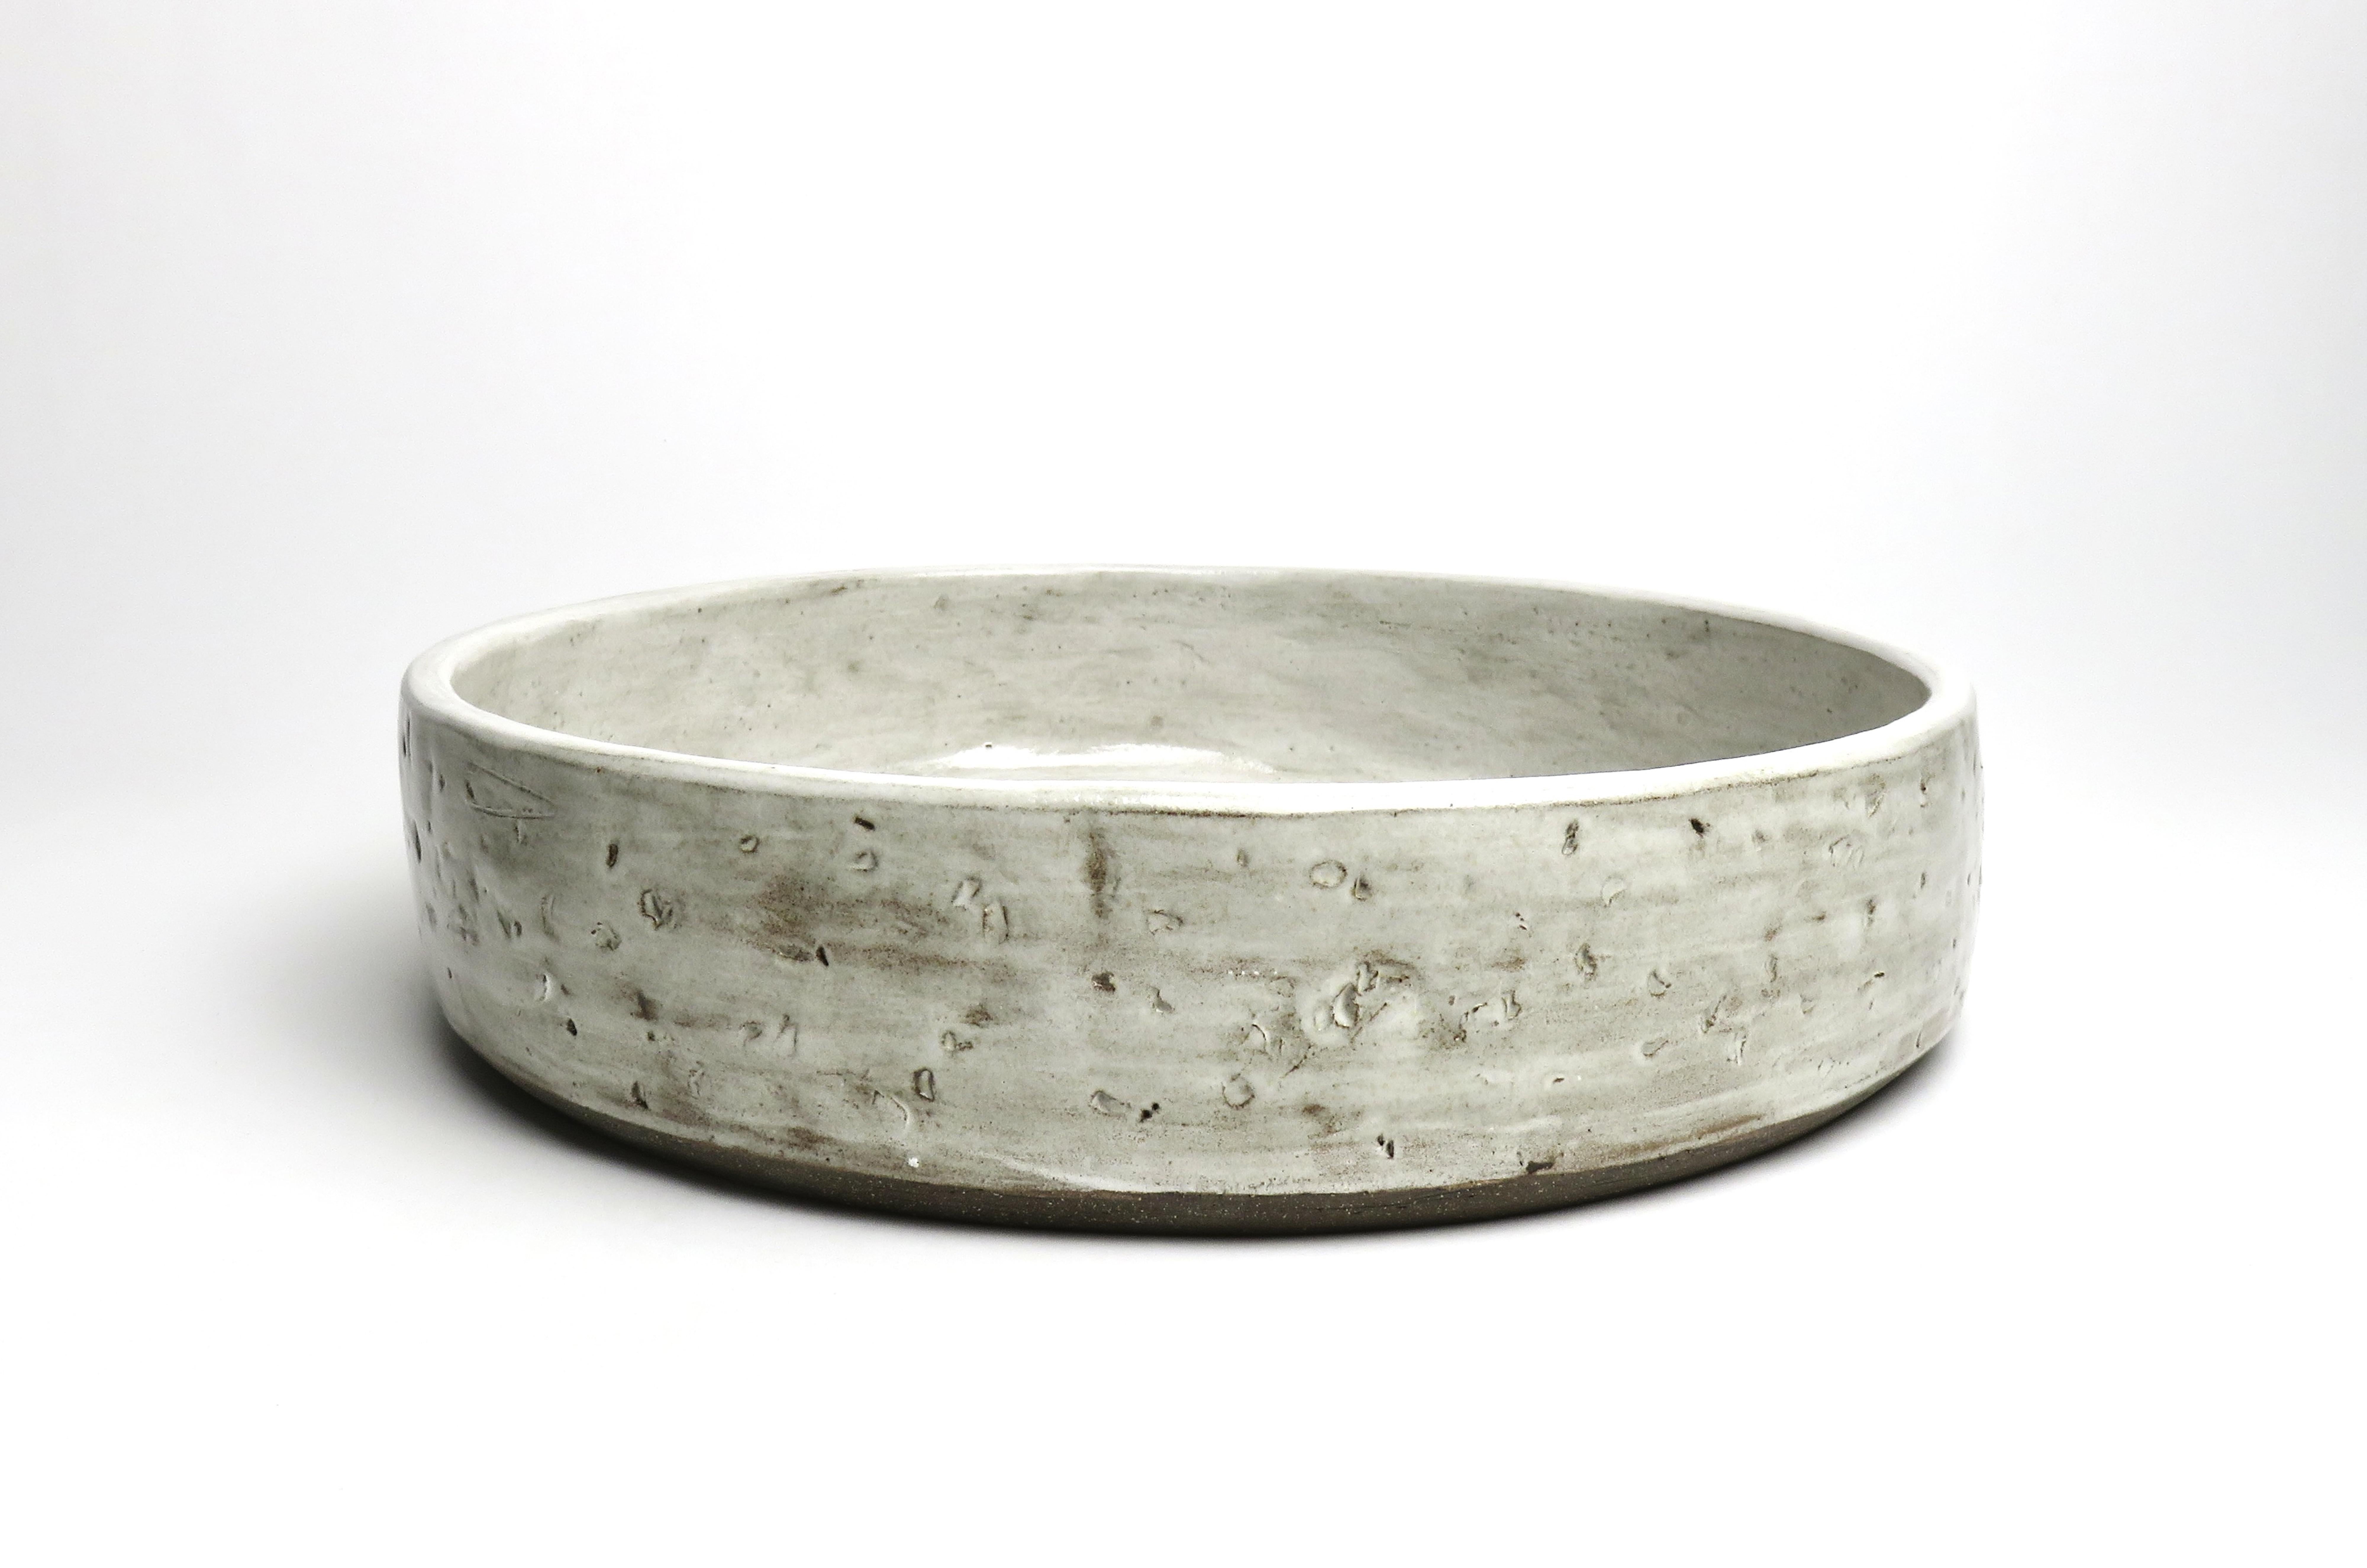 Rustic yet elegant, hand built ceramic serving bowl.  Its handmade quality and sculptural reference makes it a beautiful piece for the table at all times.  At over 12 inches in diameter it makes a strong statement, not to be mistaken with something